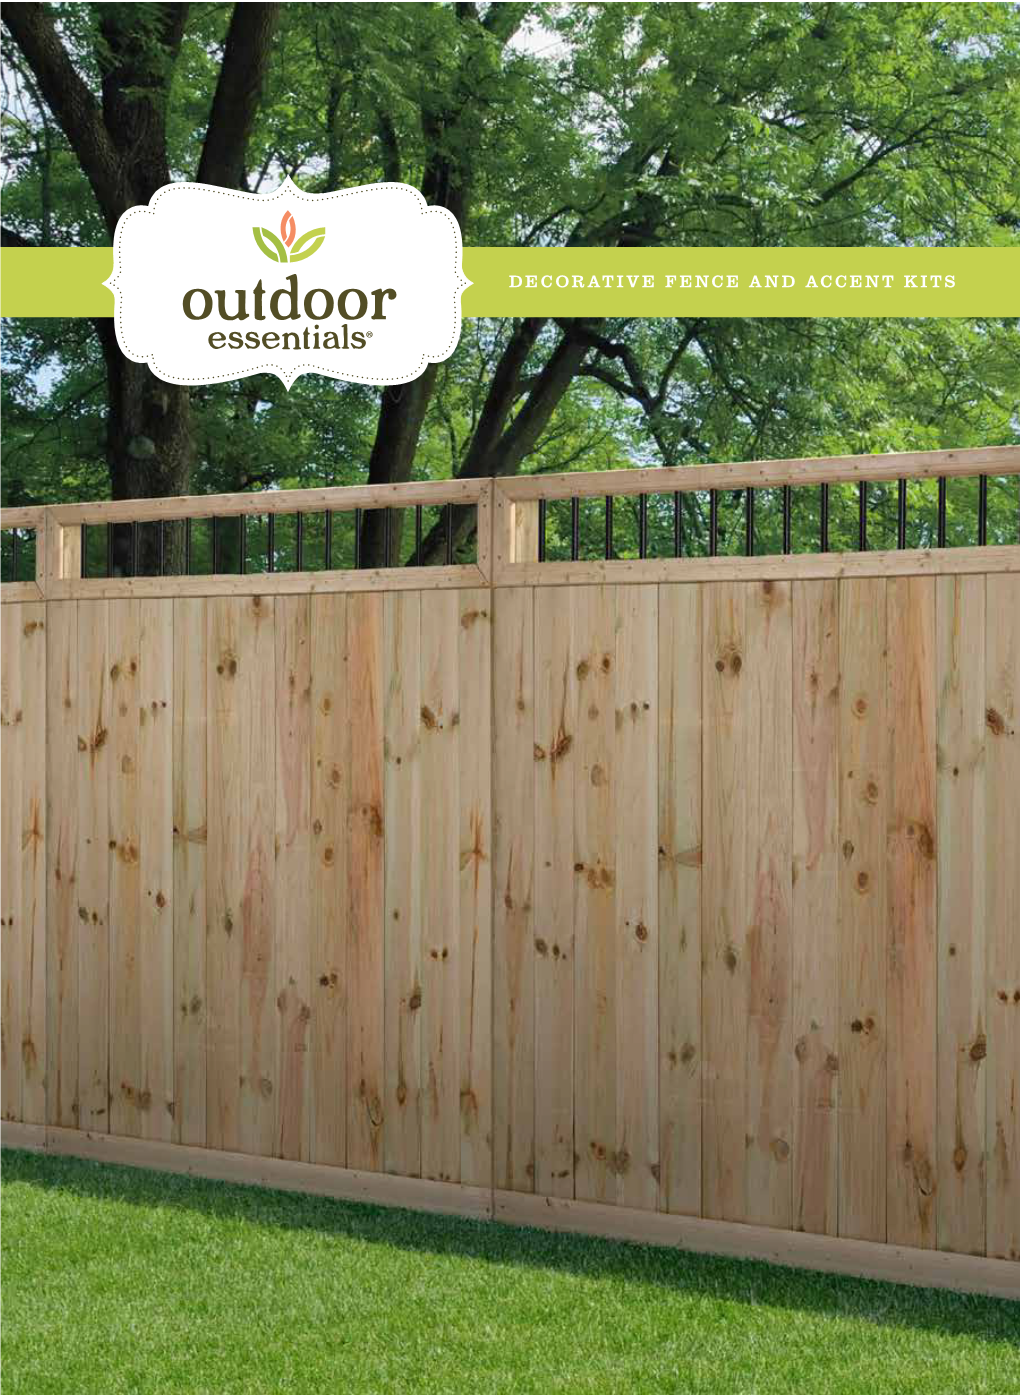 Outdoor Essentials Decorative Fence and Accent Kits